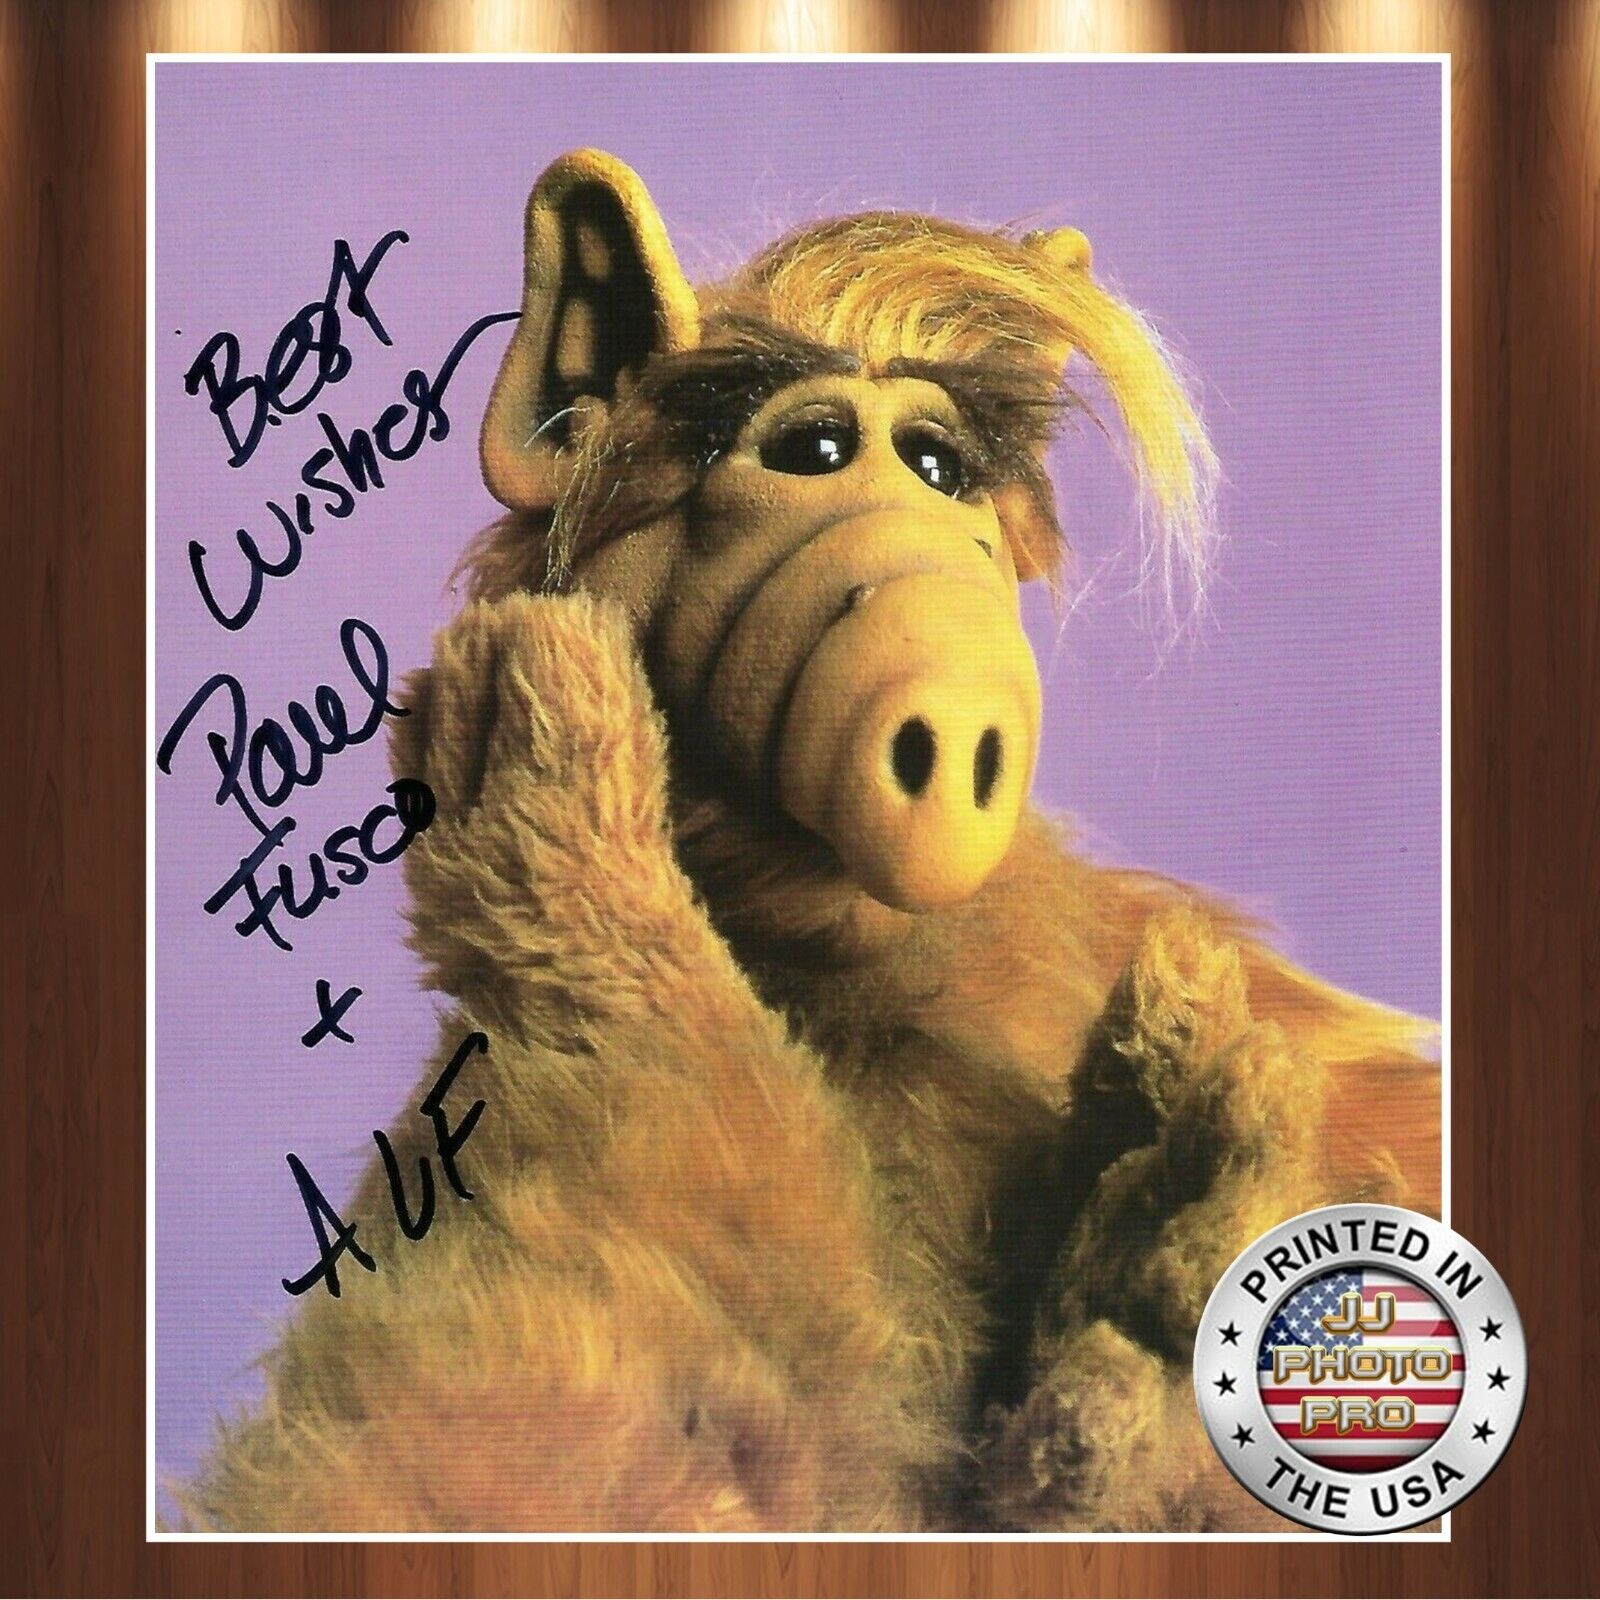 Paul Fusco Autographed Signed 8x10 Photo Poster painting (ALF) REPRINT